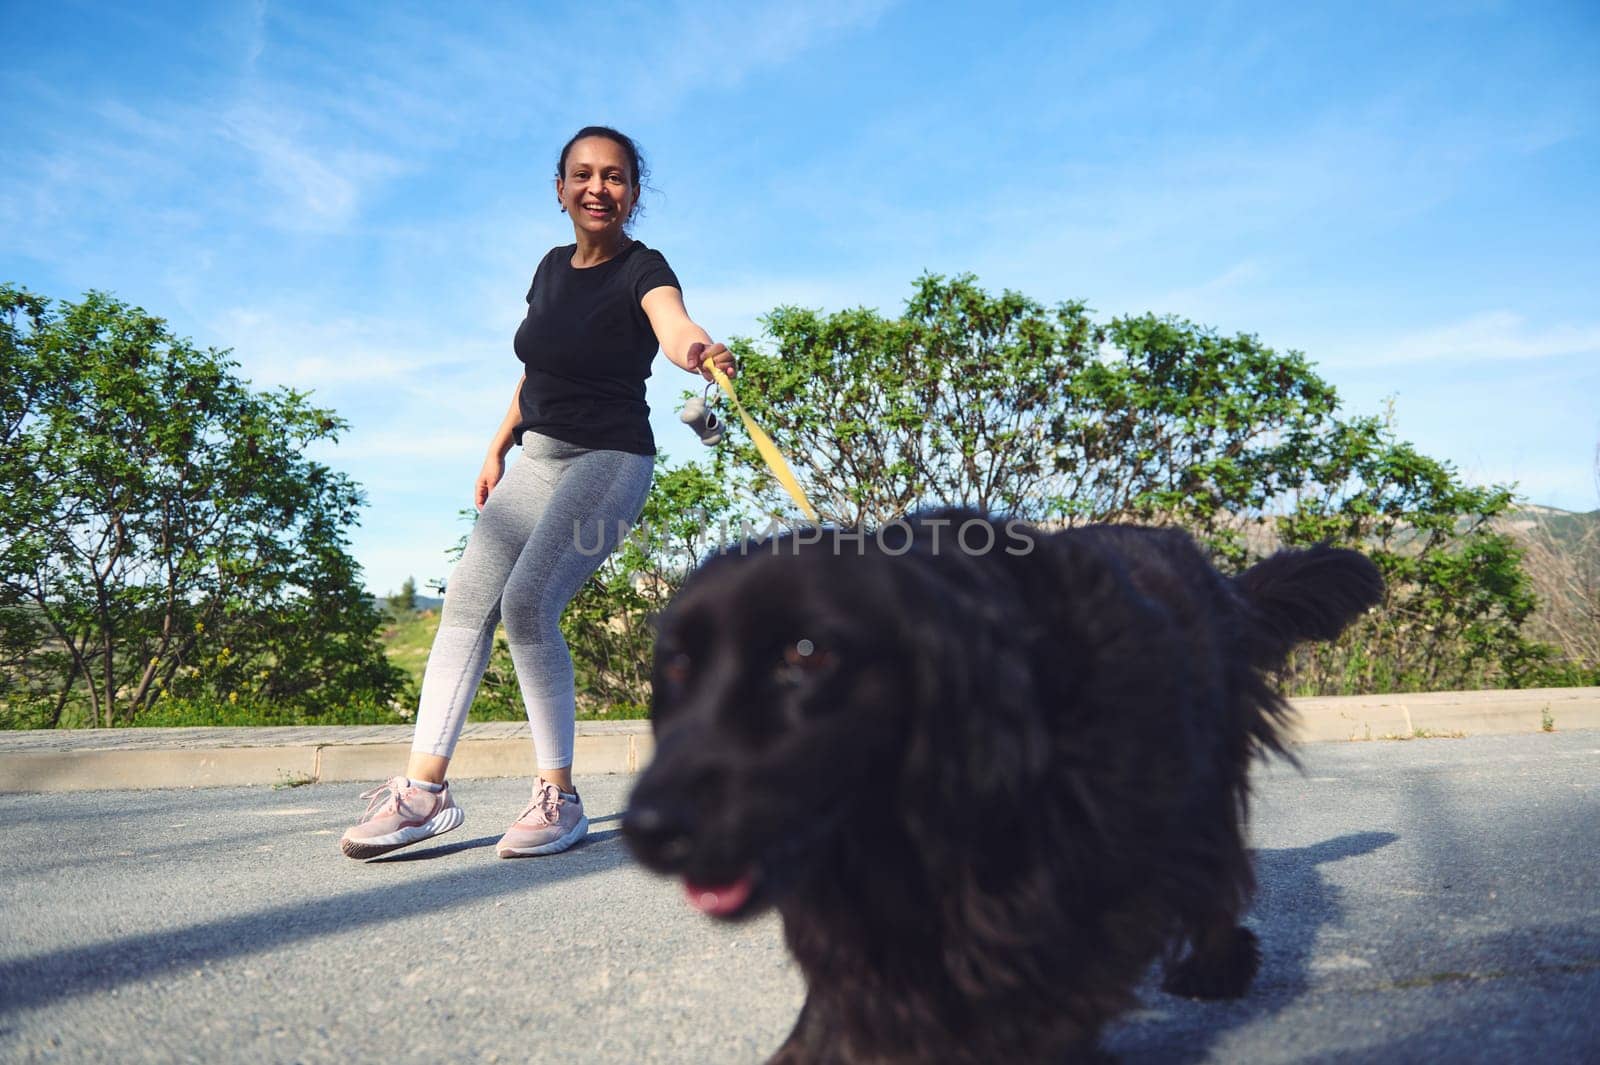 Happy woman walking her dog outdoors. Pretty female athlete dressed in gray leggings and black t-shirt, walking her cocker spaniel pet on leash by artgf